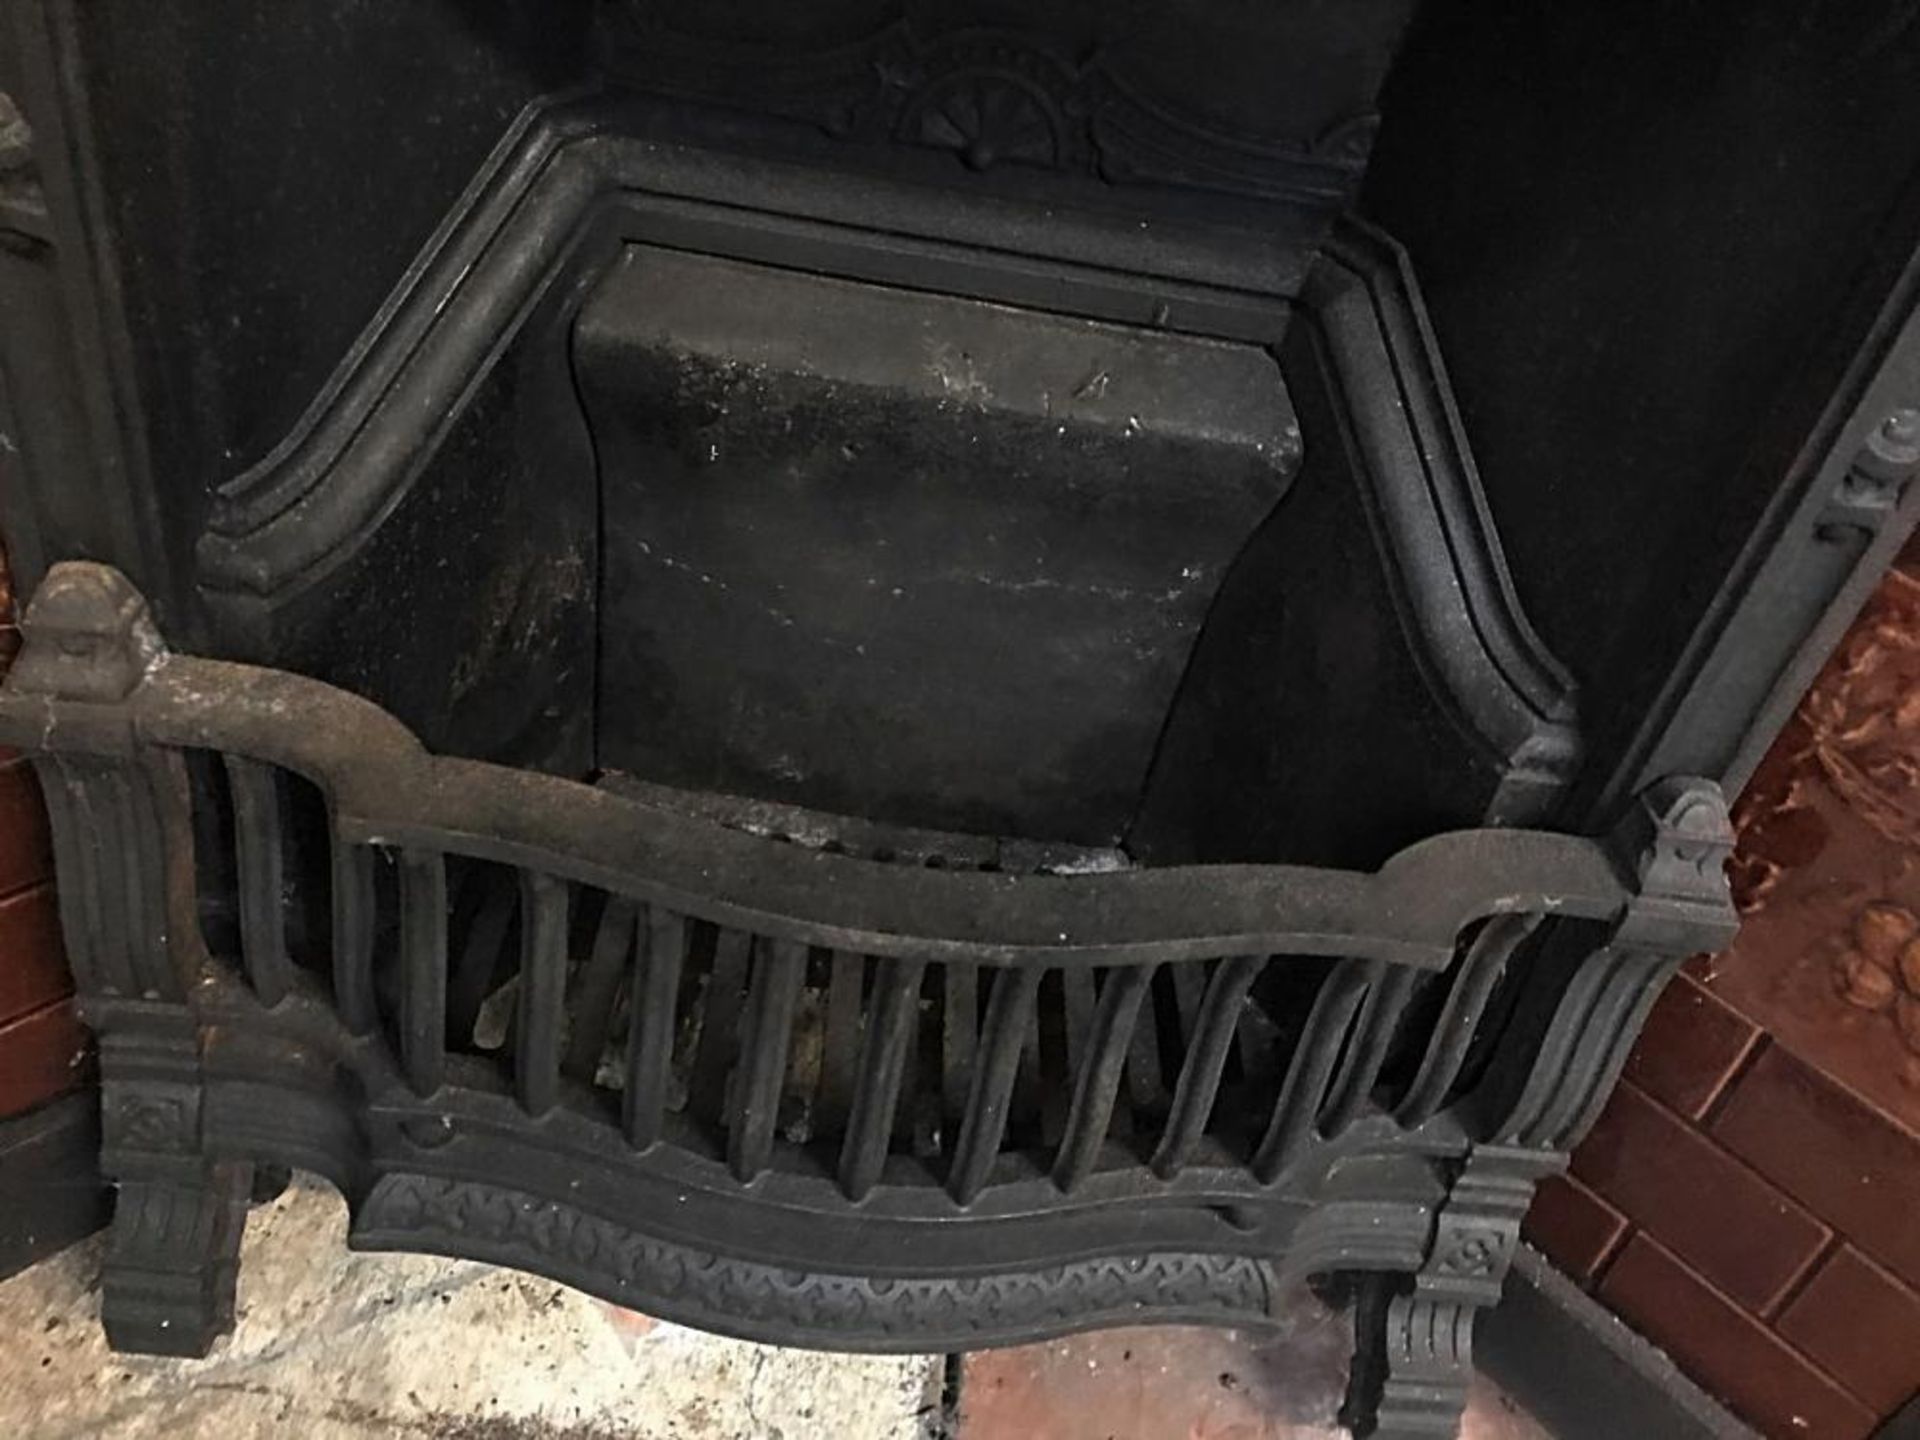 1 x Stunning Antique Victorian Cast Iron Fire Surround With Pristine Tiled Sides - Dimensions: Heigh - Image 8 of 9